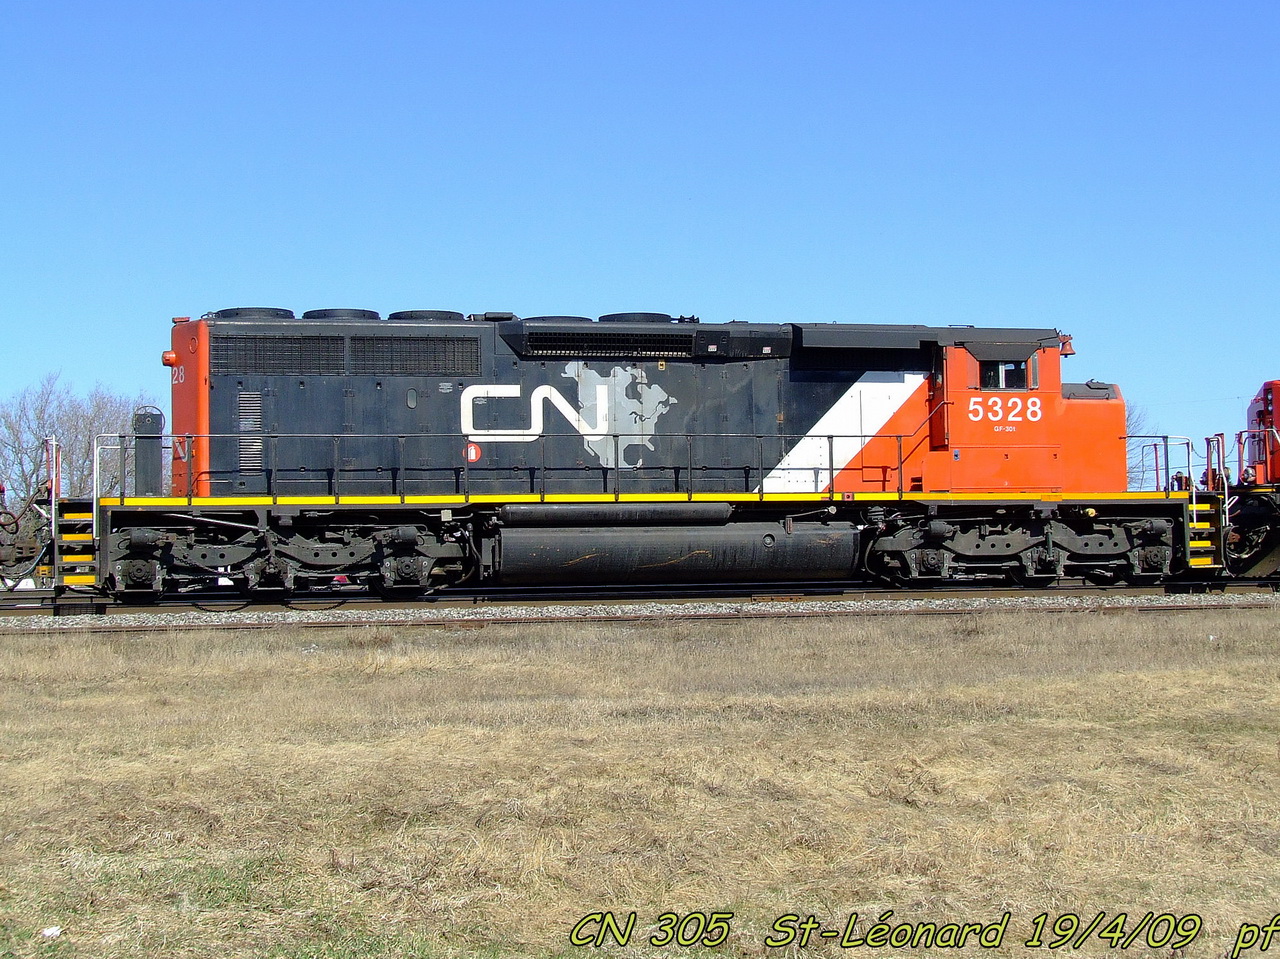 CN 305 with a very clean 5328 in the lash-up stops to meet an eastbound.